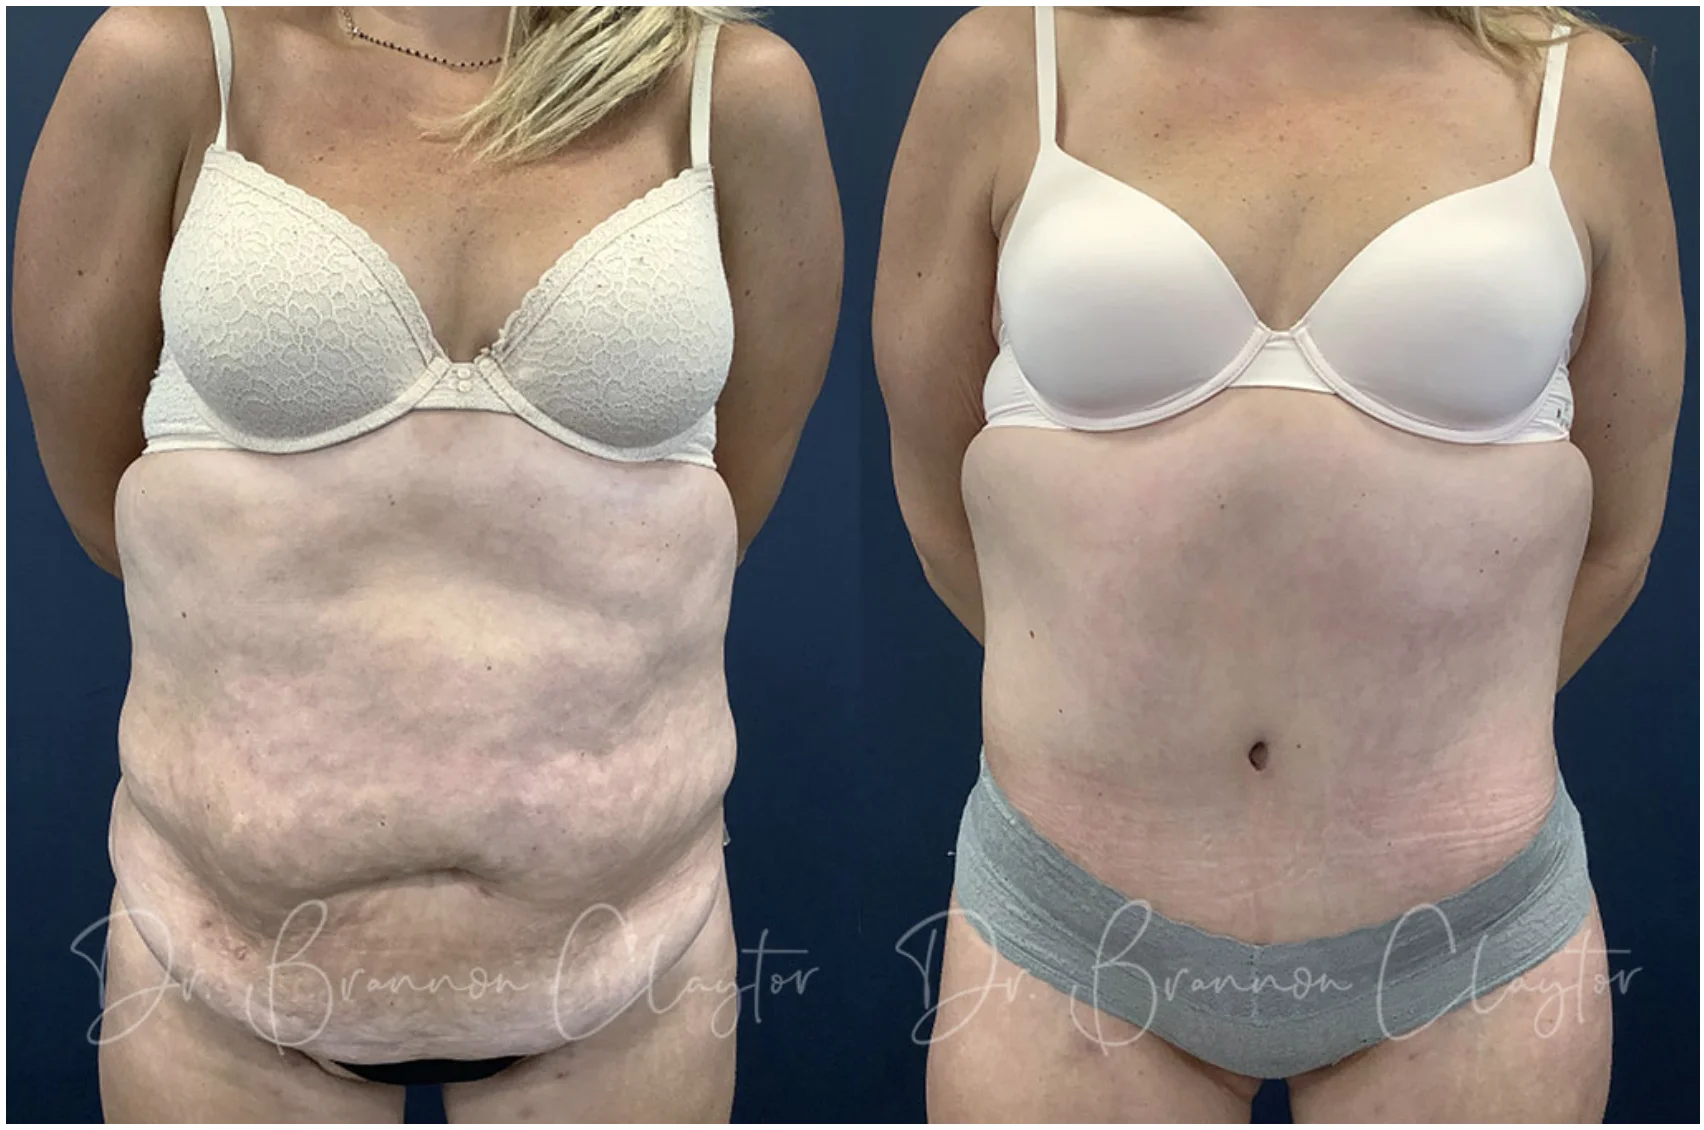 Drains after tummy tuck - for how long? - Power Plastic Surgery